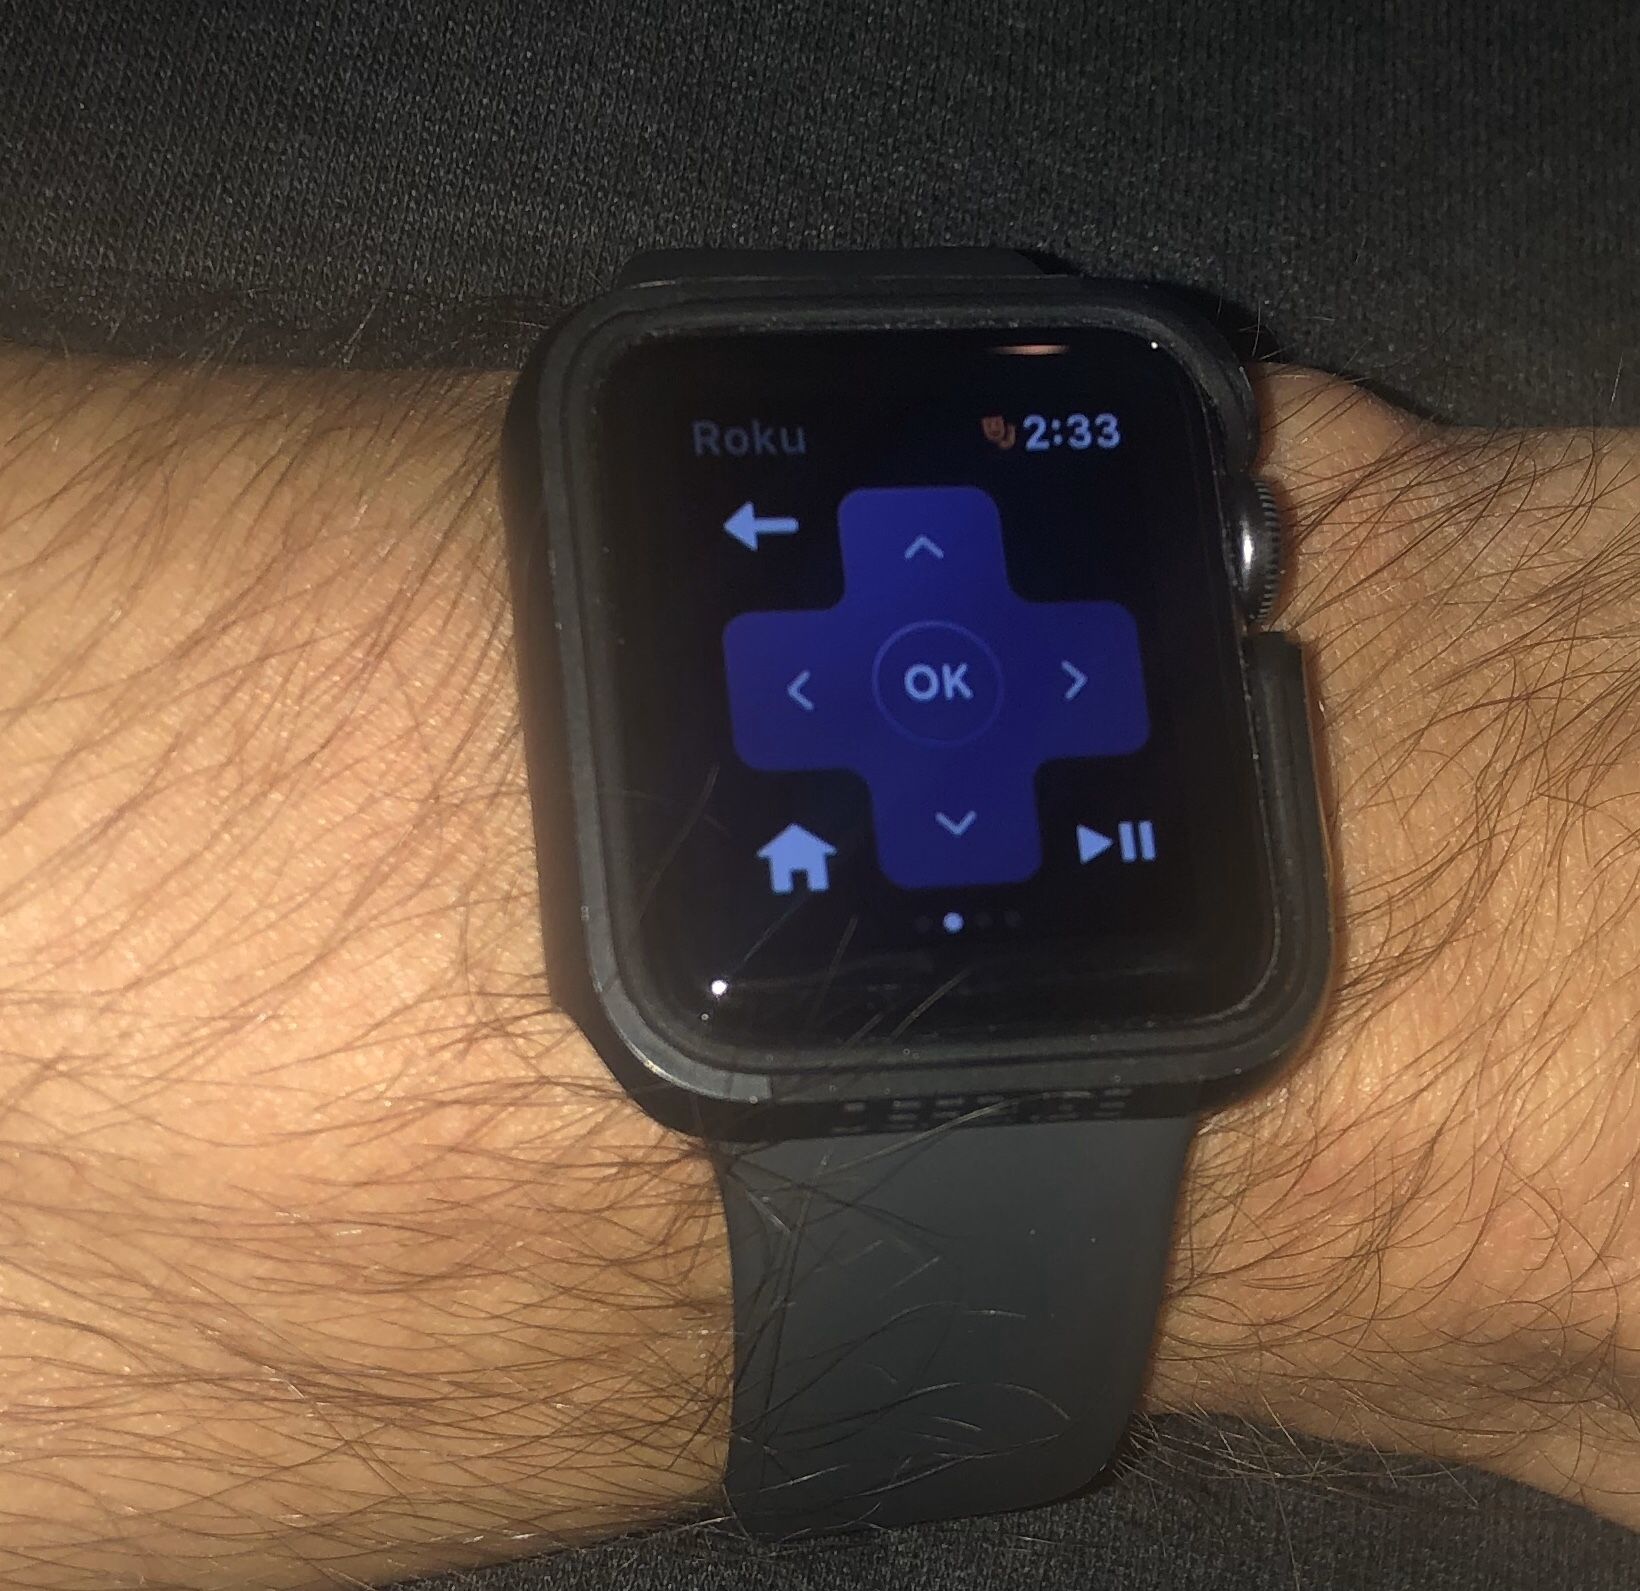 BRAND NEW APPLE 🍎 WATCH 3 GPS COMES WITH XTRA BAND AND PROTECTIVE GUARD AROUND FACE OF THE WATCH NOW HAS ROKU APP TO CONTROL THE 📺 TV $140 CASH FIRM